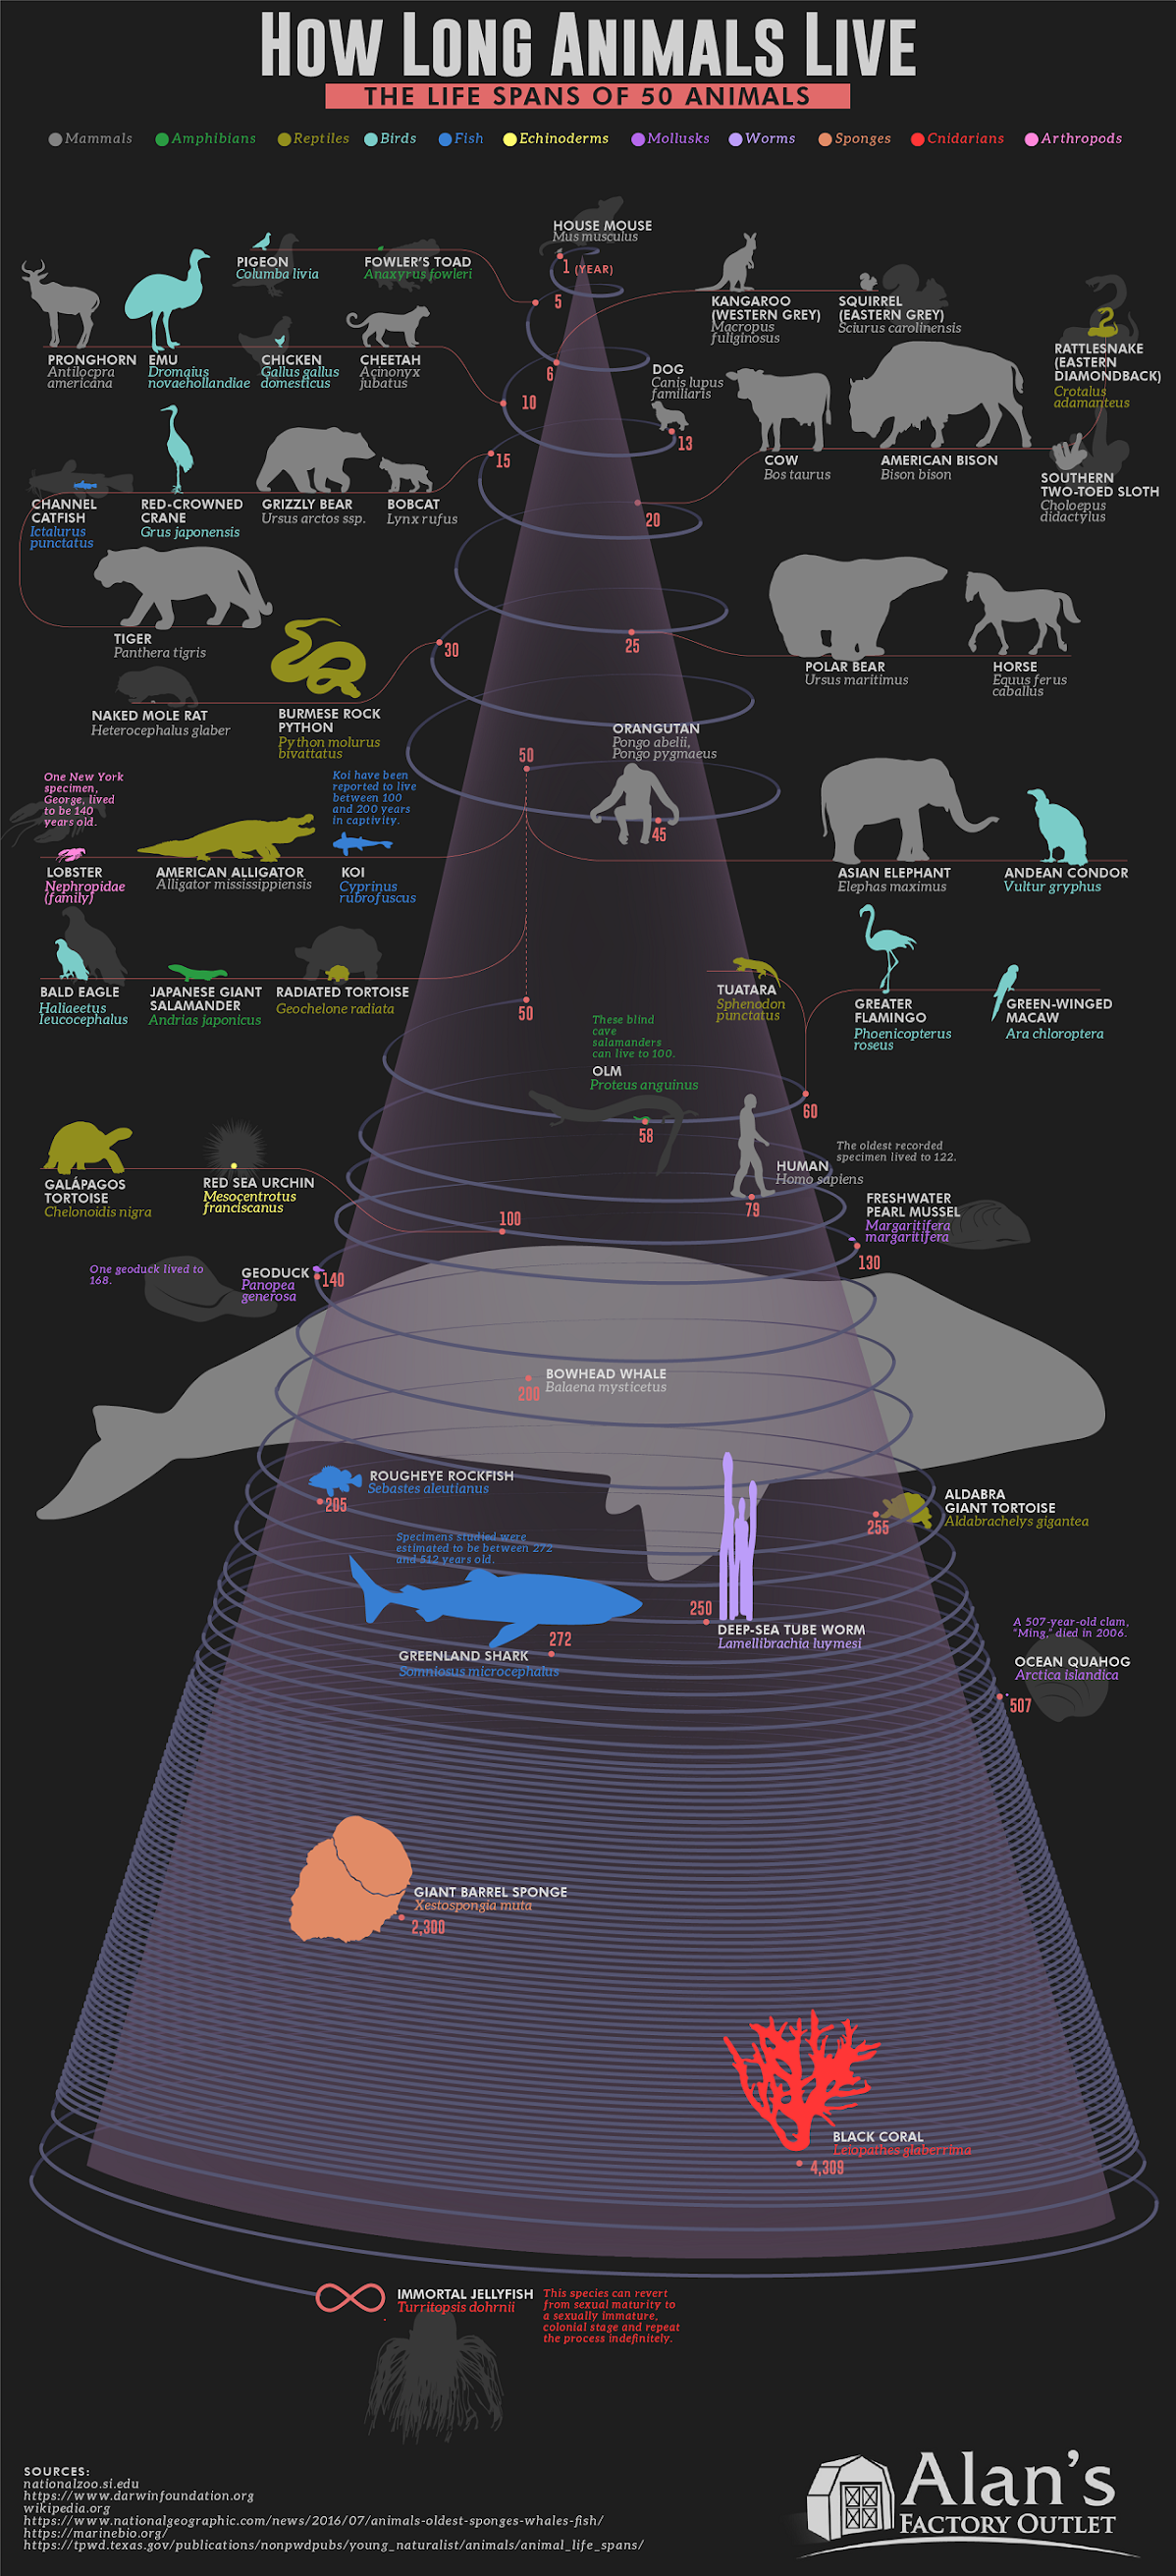 How Long Animals Live: The Life Spans of 50 Animals #infographic